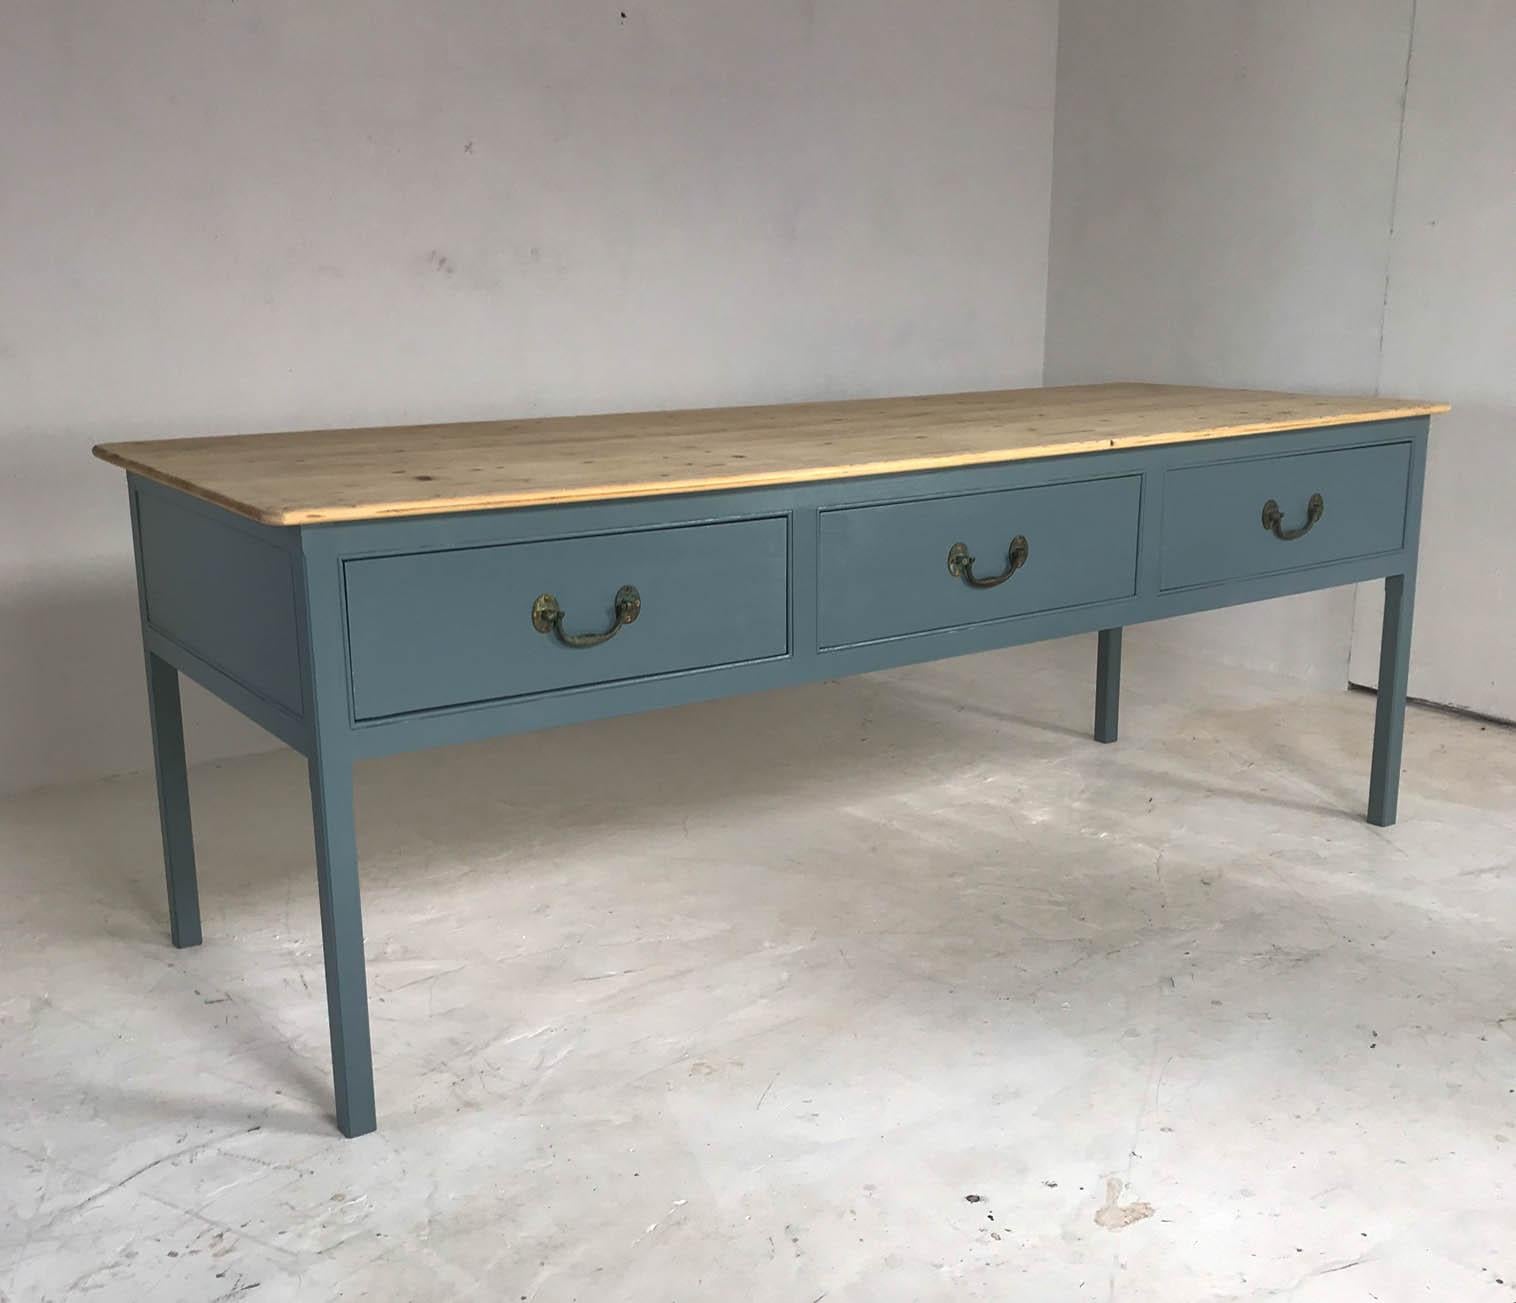 Georgian style kitchen prep table based on designs found in old English Country Homes. It has been hand painted in farrow and ball's new color, the elegant but down to earth De Nimes. The table features three large drawers with original antique